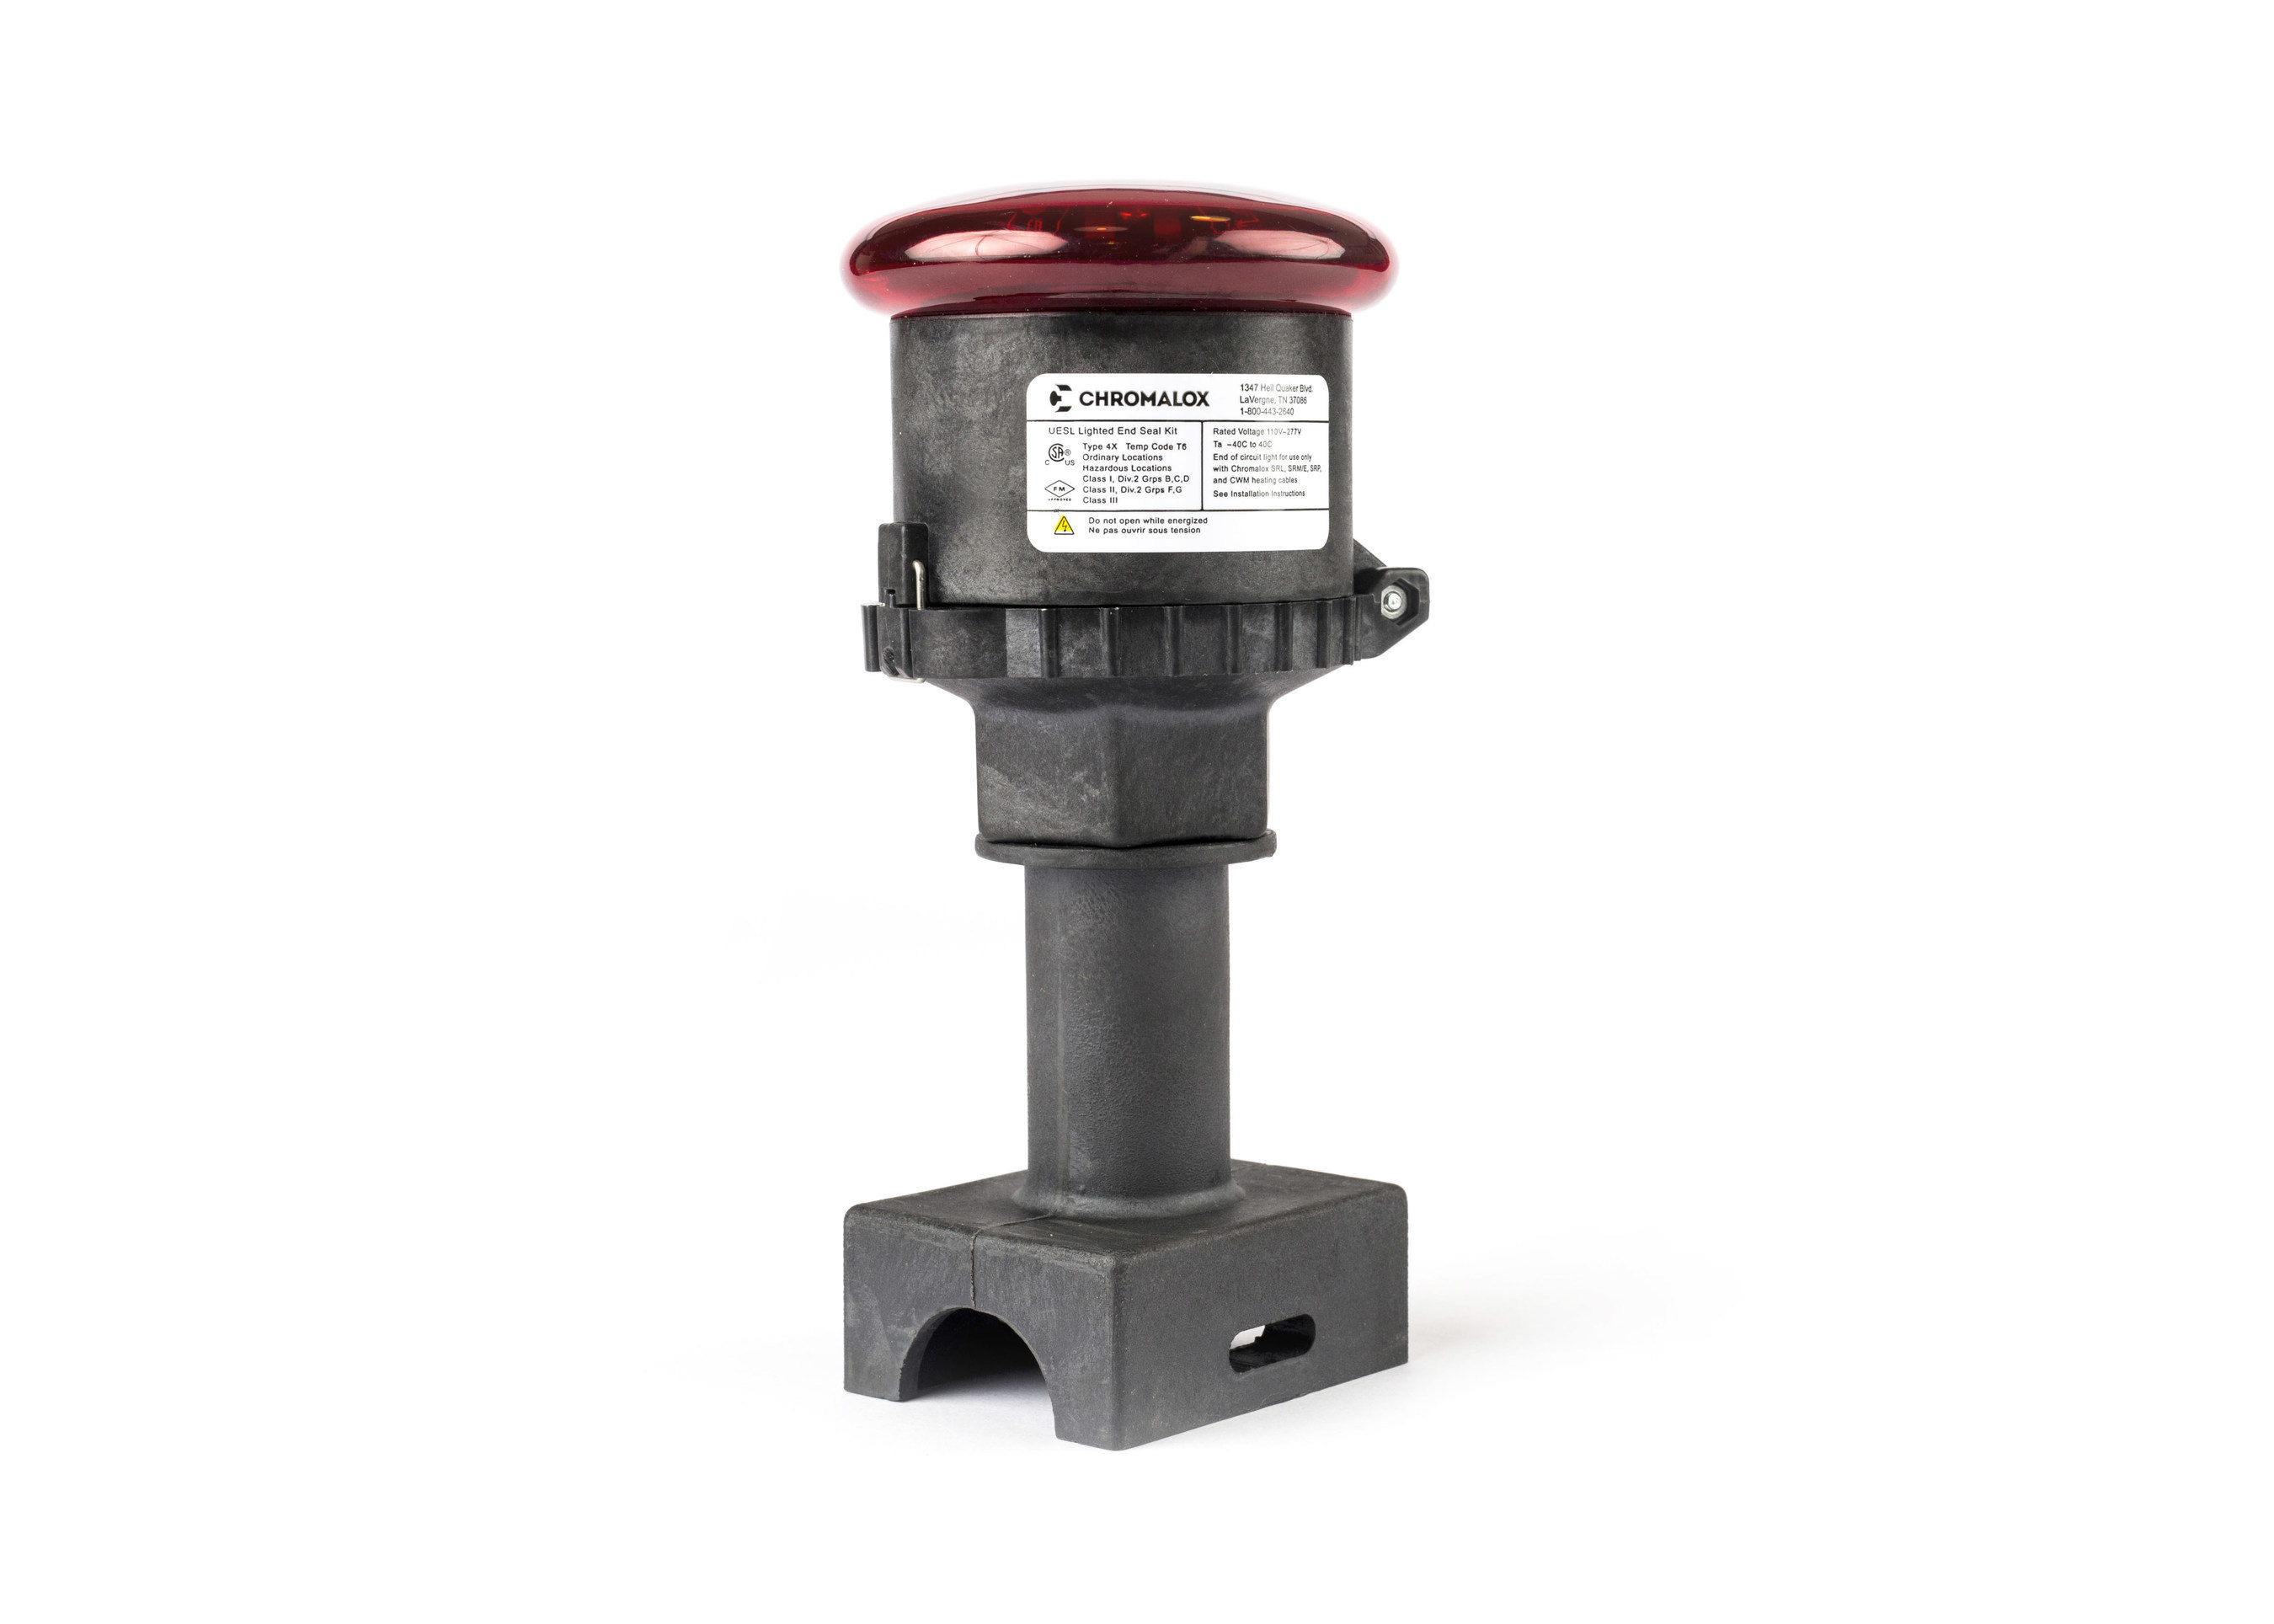 The UESL End Seal Signal Light Kit provides visual indication that a heat trace circuit is energized and is designed for use in Energy and commercial building & construction markets.